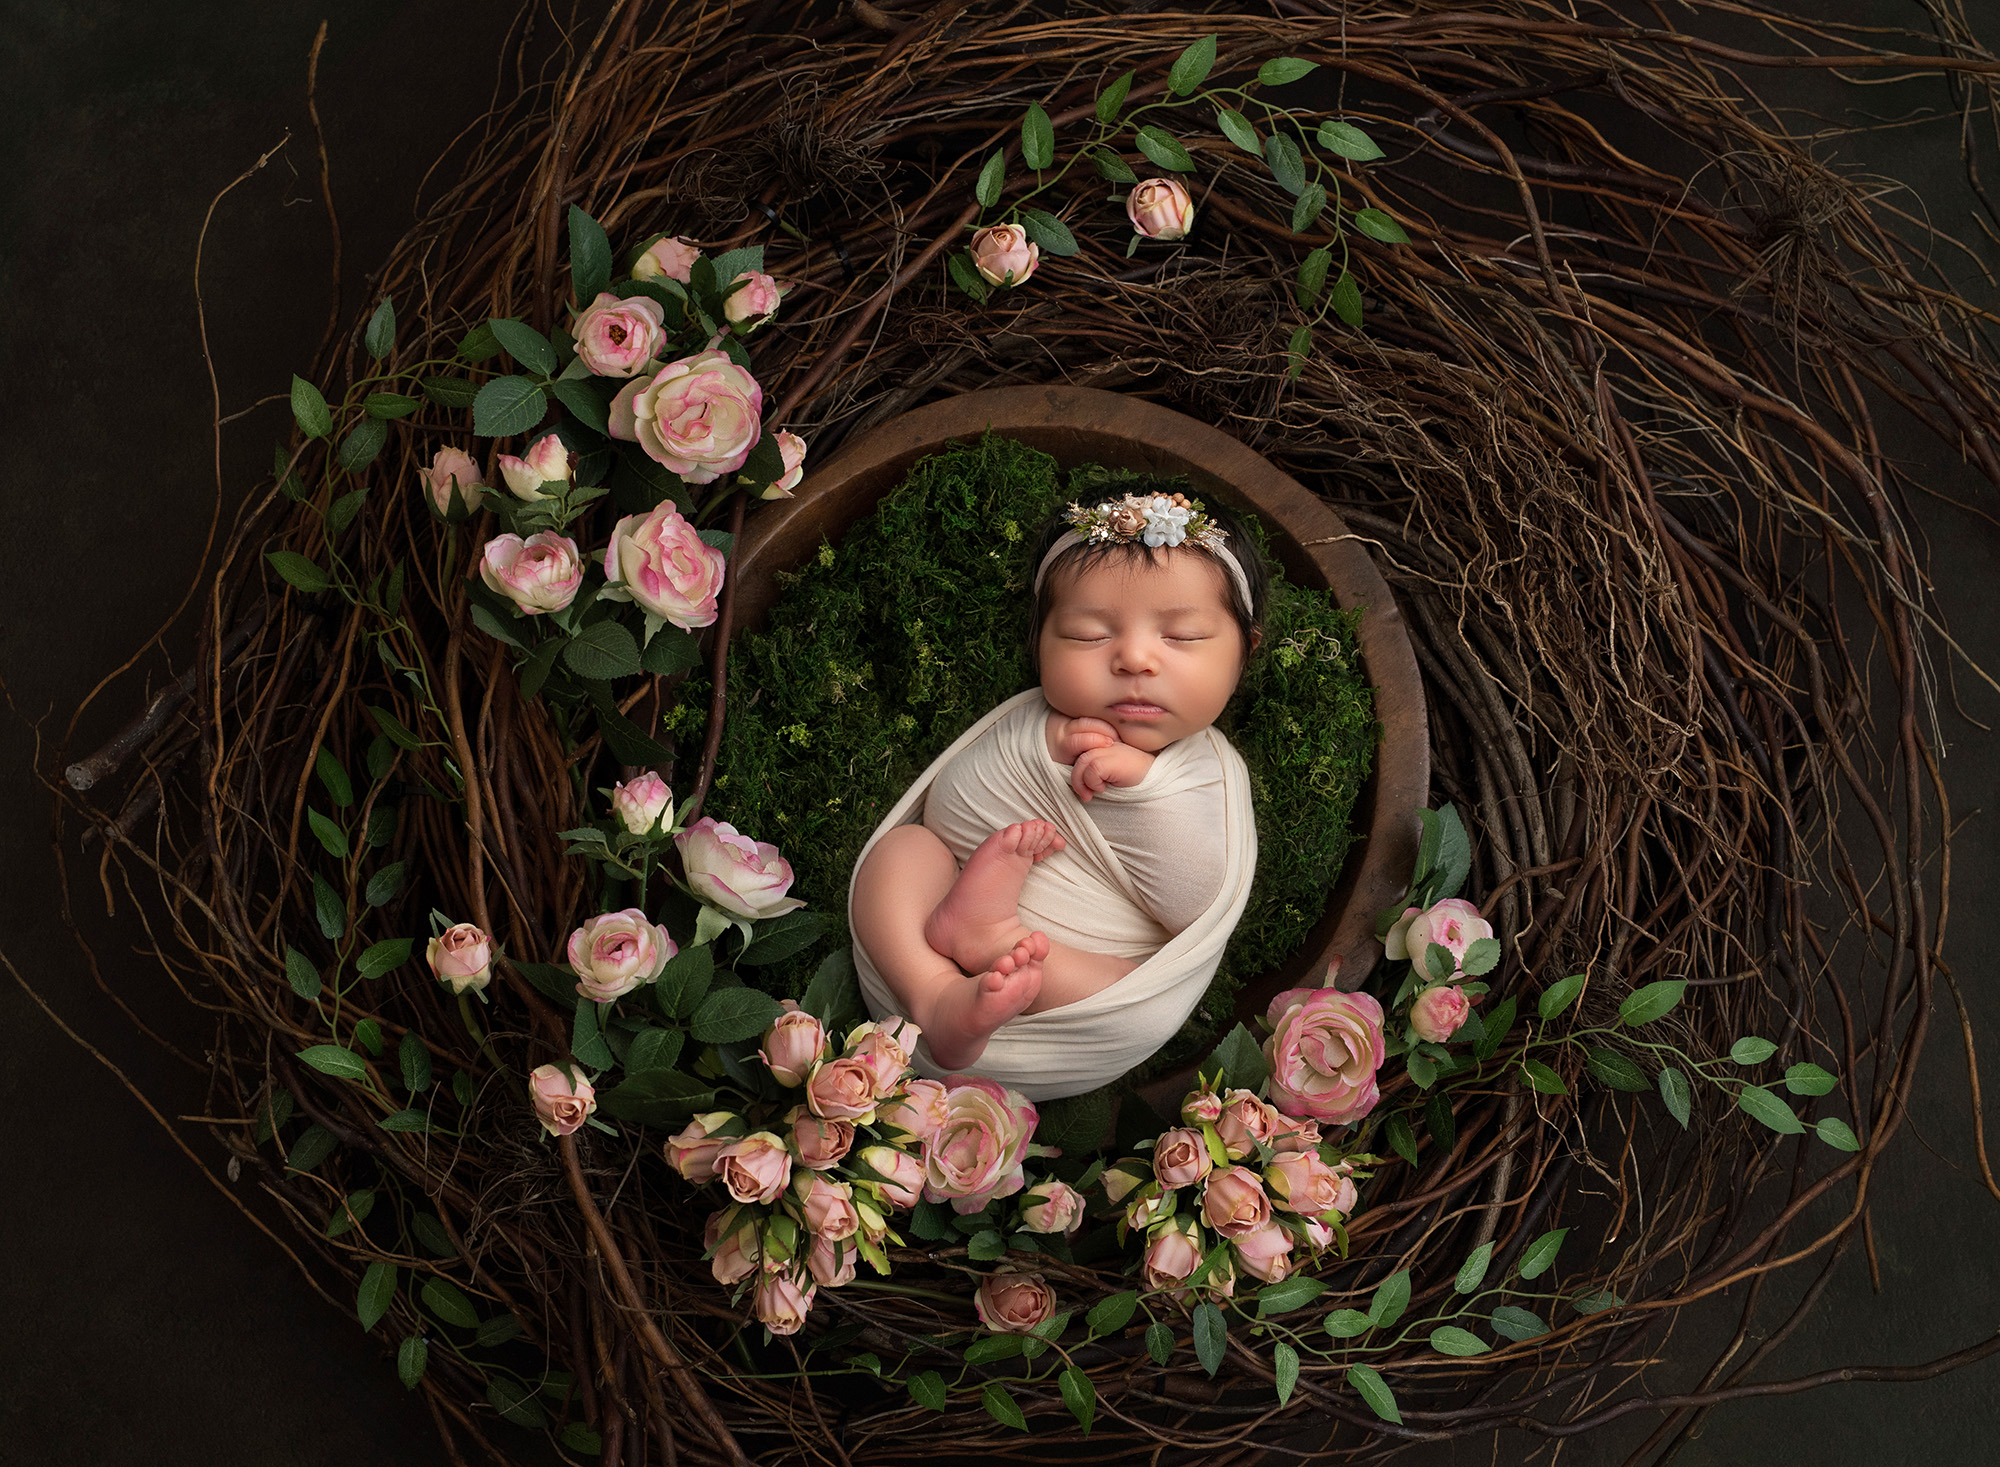 outdoorsy newborn photos newborn baby girl asleep inside wooden wreath surrounded by pink roses